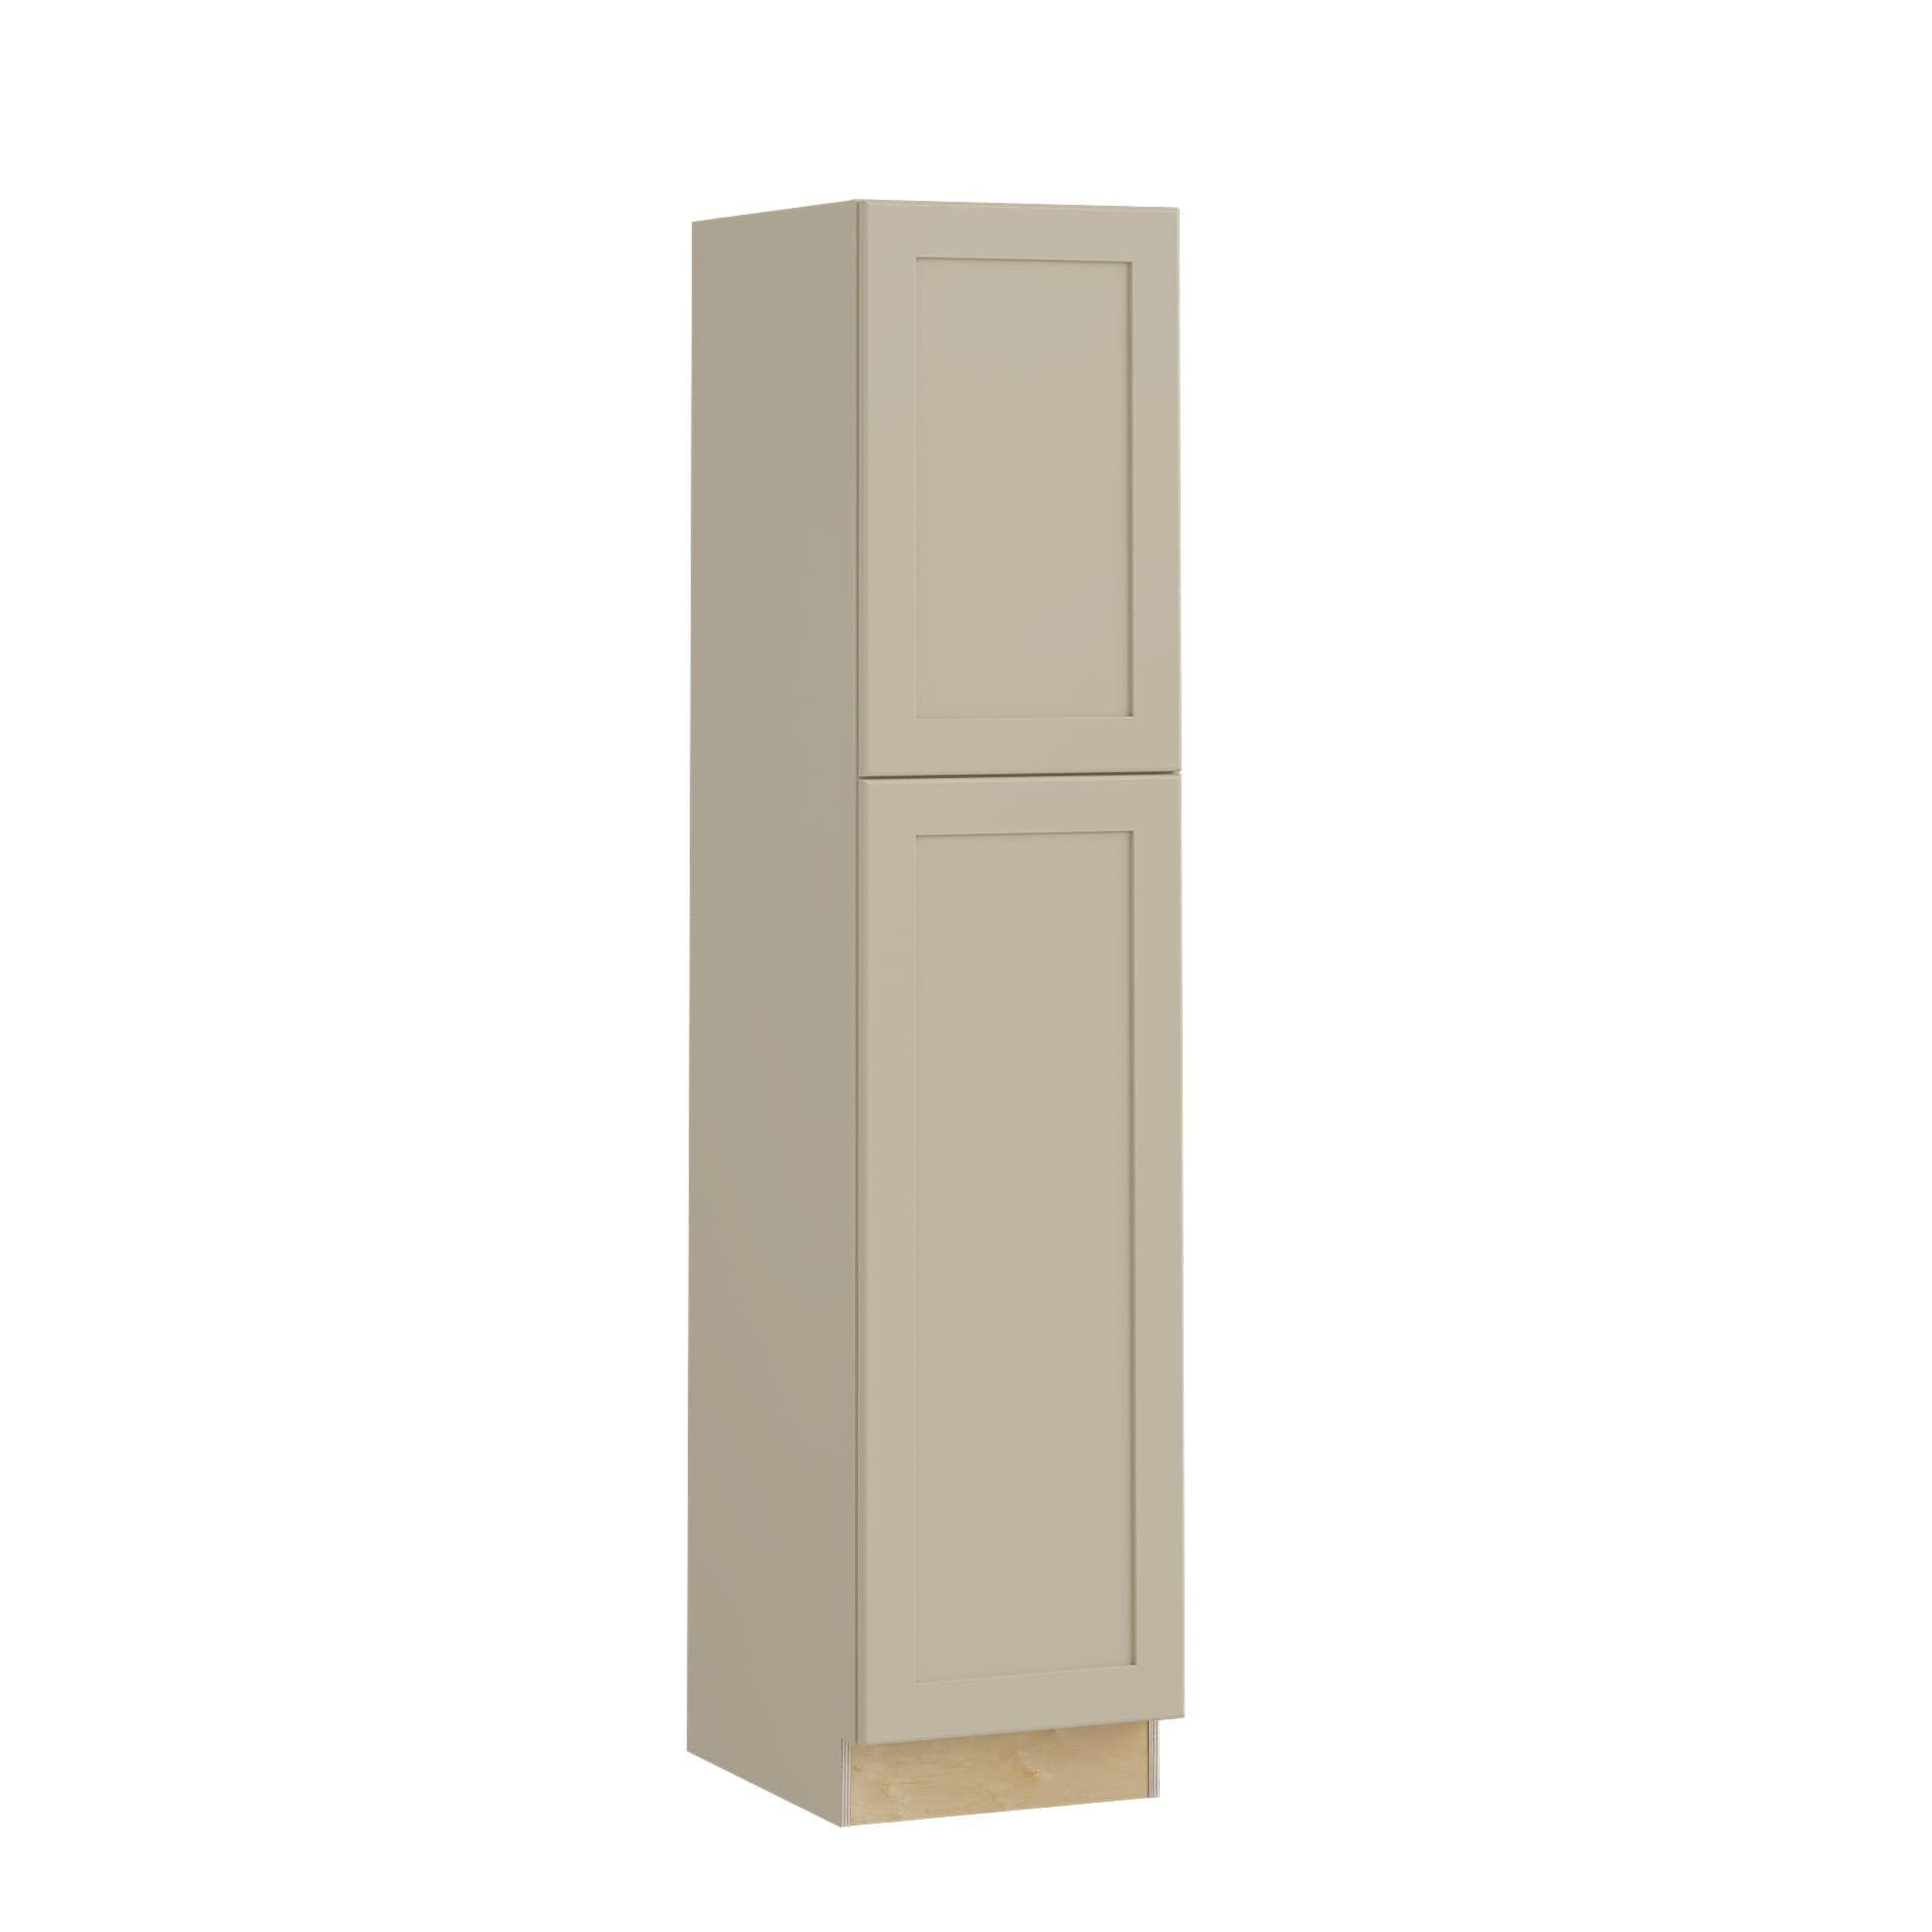 Luxxe Cabinetry 18-in W x 84-in H x 24-in D Norfolk Blended Cream Painted Door Pantry Fully Assembled Semi-custom Cabinet in Off-White | U182484R-NBC